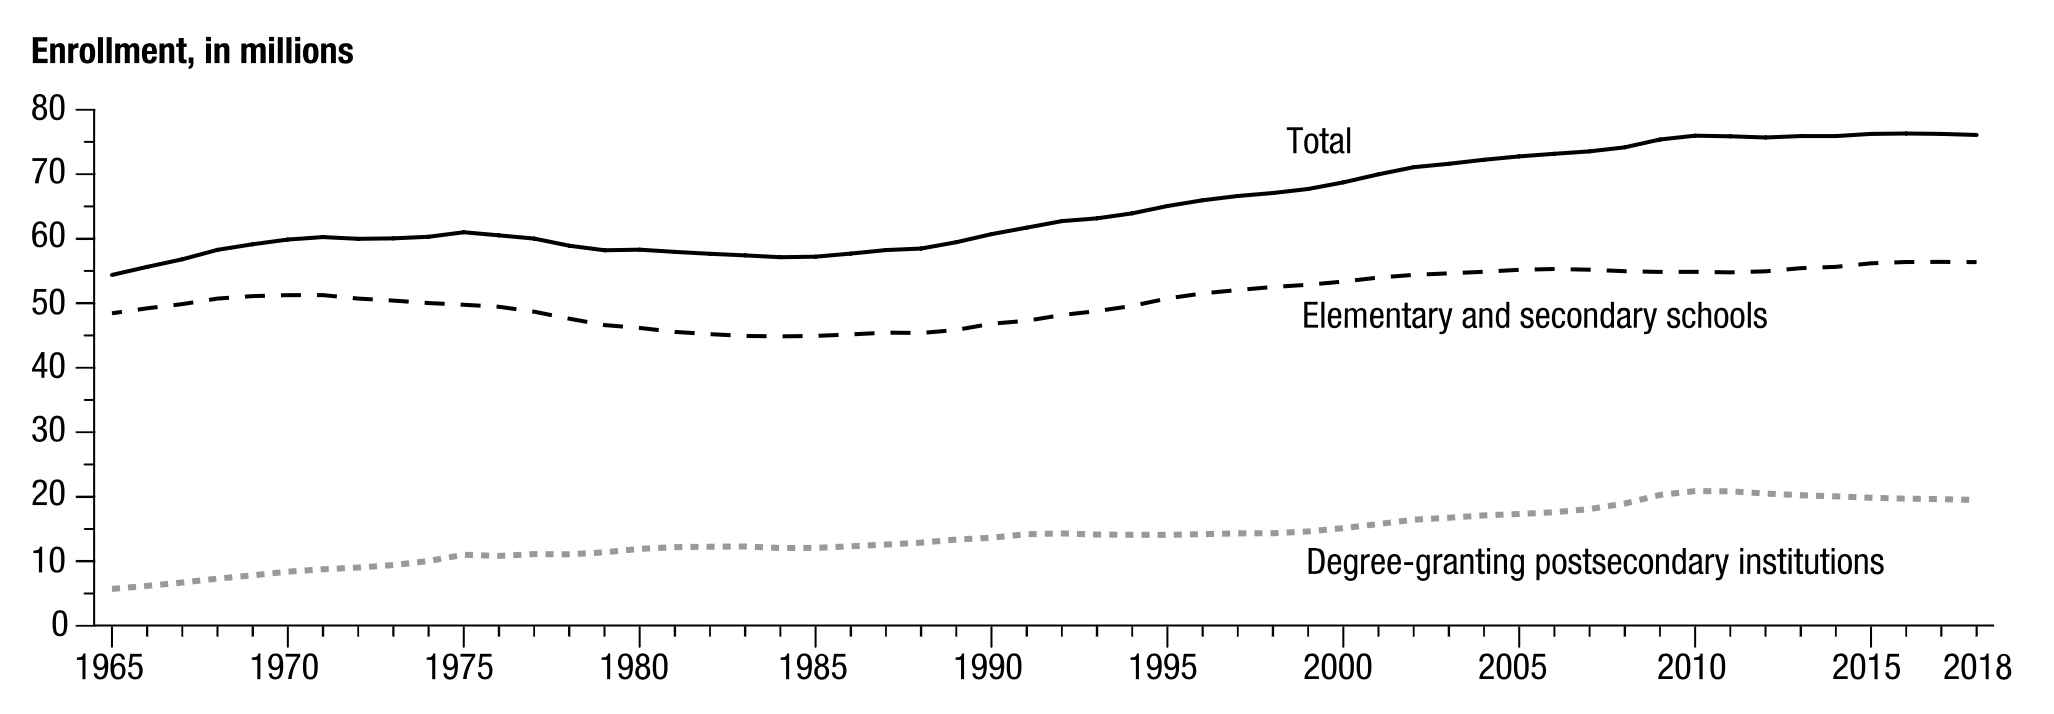 U.S. Department of Education, National Center for Education Statistics. (2021). Digest of Education Statistics, 2019 (NCES 2021-009), Chapter 1.